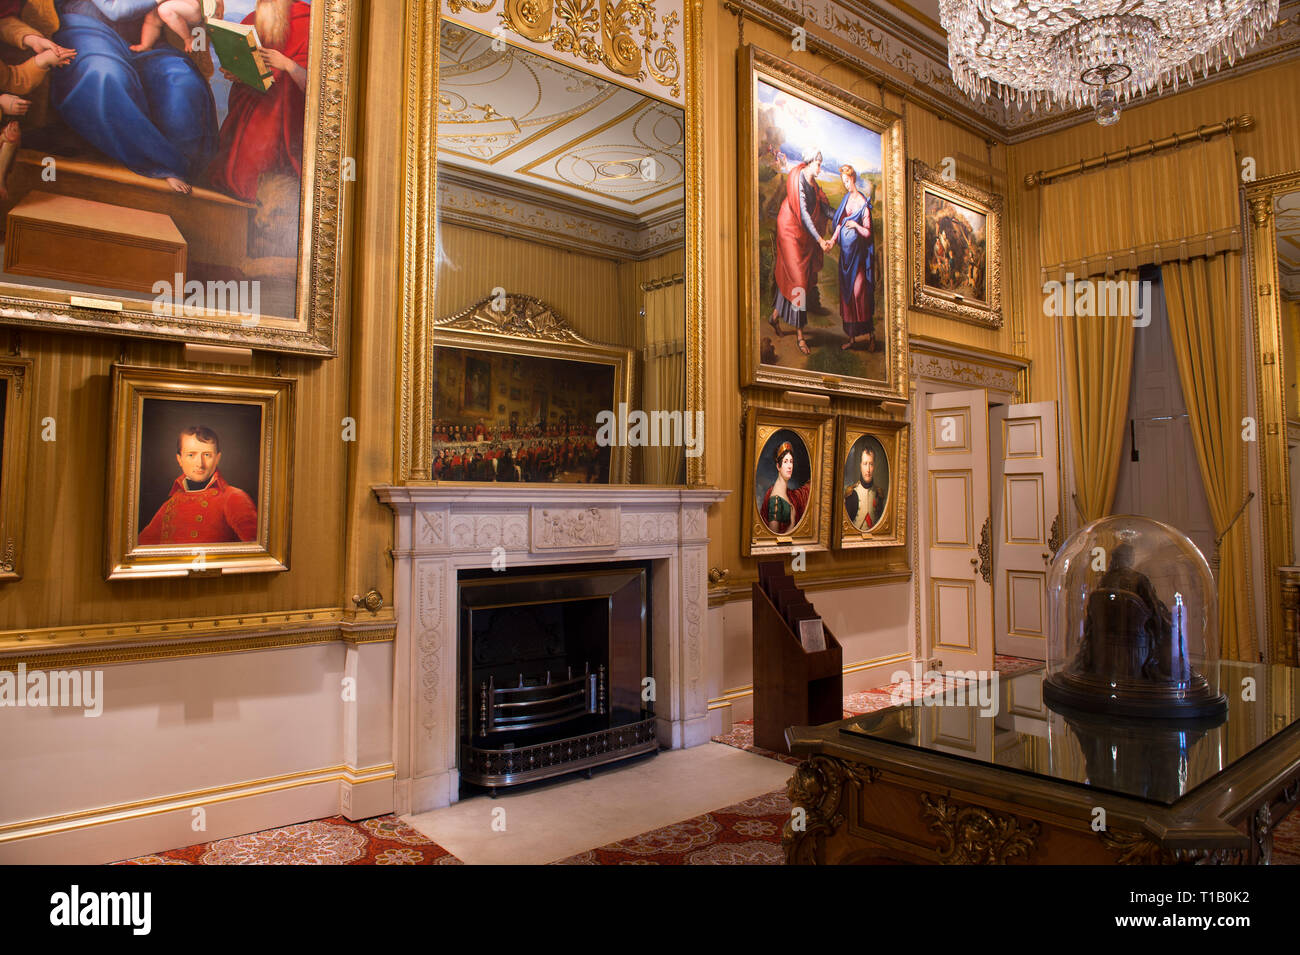 Apsley House, London, UK. 25 March, 2019. ‘Young Wellington in India’ exhibition explores the early years and provide insights into the man known globally as the 1st Duke of Wellington, who later defeated Napoleon Bonaparte at Waterloo in 1815. The exhibition runs from 30 March - 3 November 2019. Credit: Malcolm Park/Alamy Live News. Stock Photo